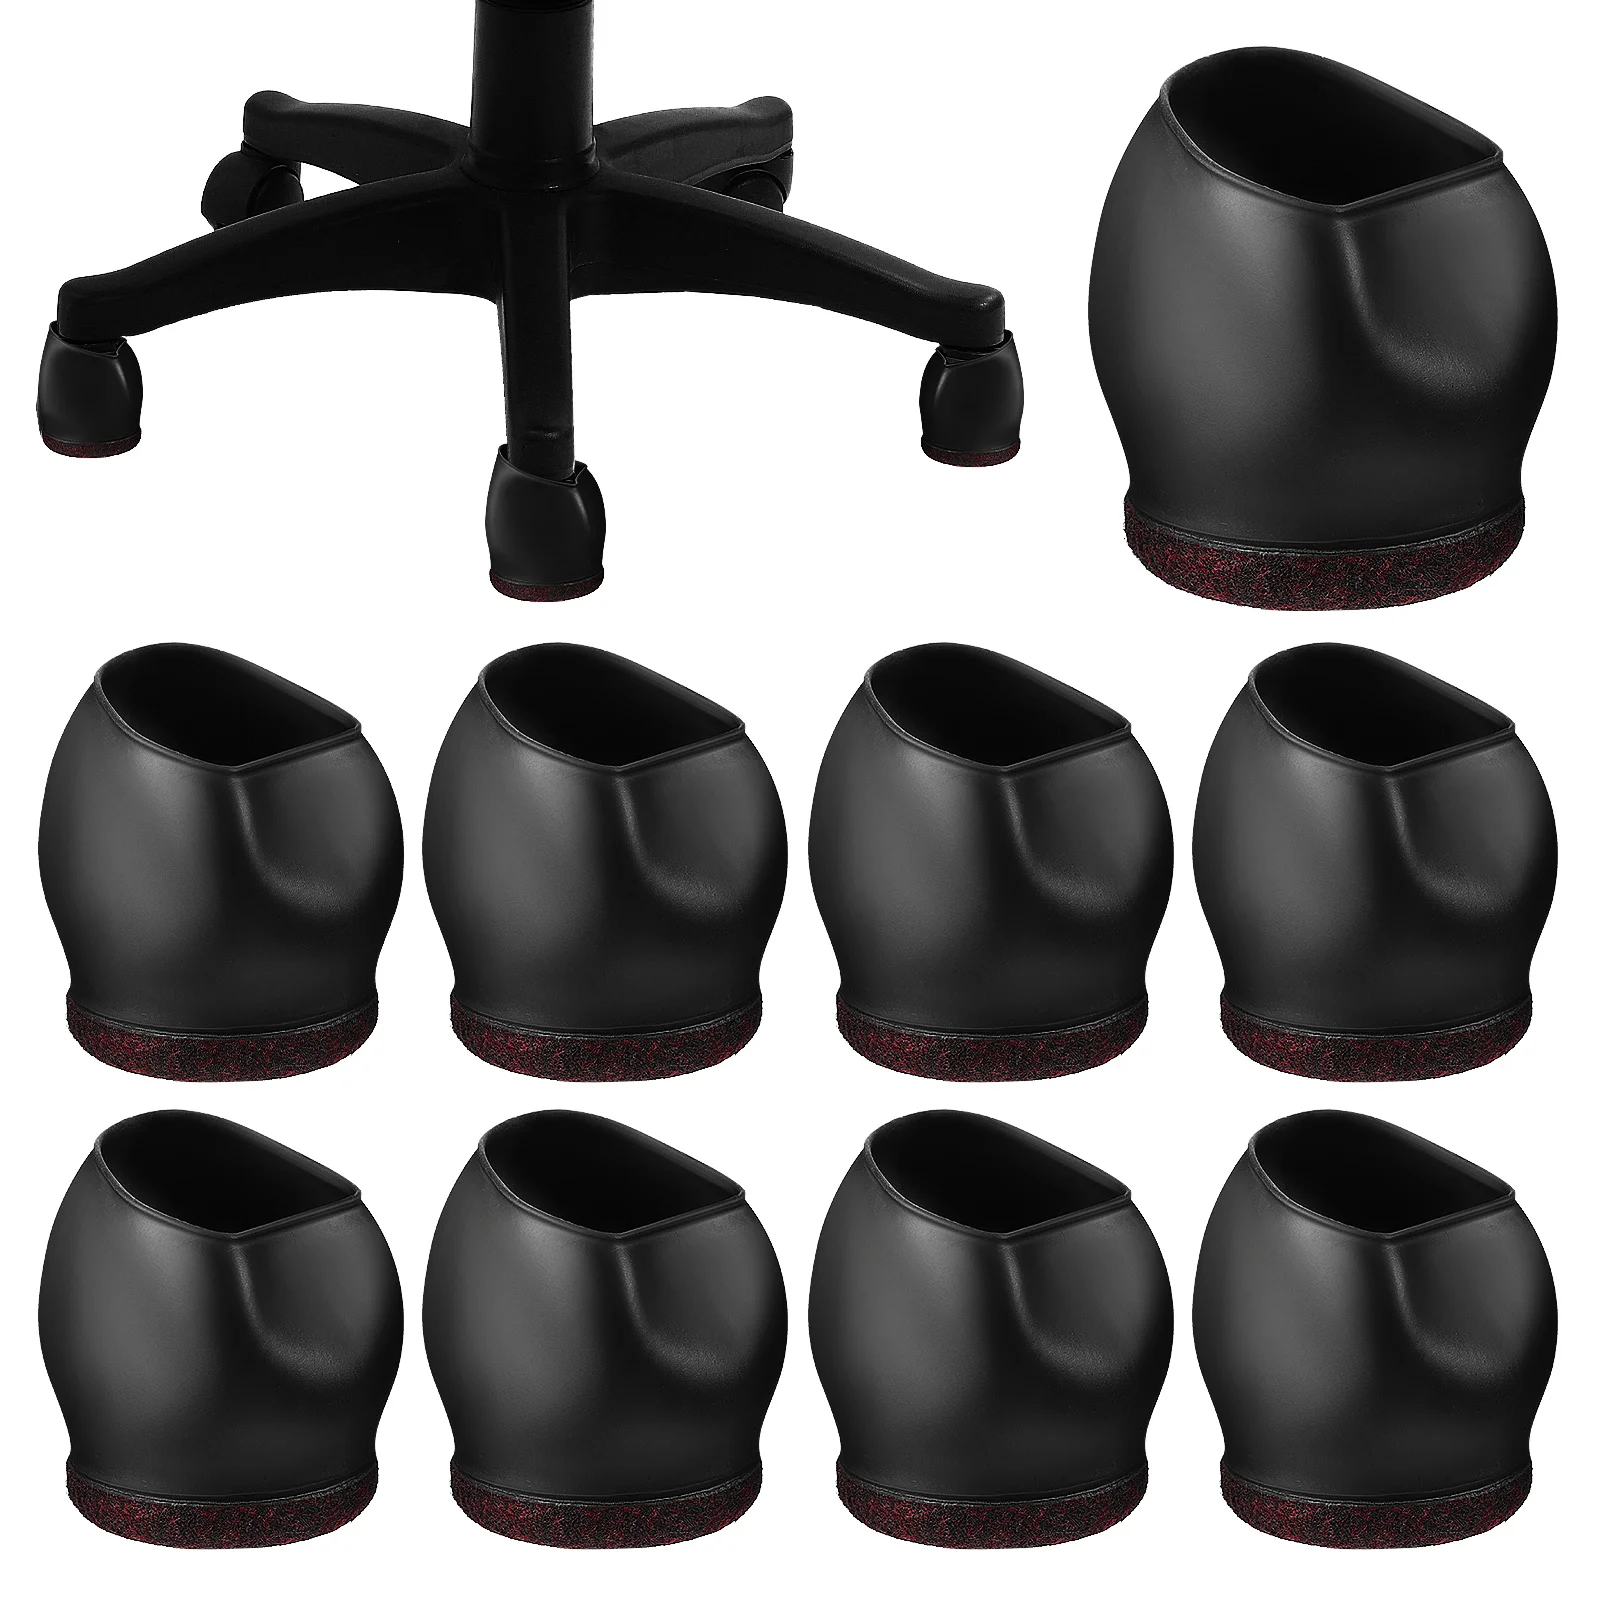 

10 Pcs Protective Floor Covers Rolling Dining Room Caster Chair Office Wheel Stopper Case Leg Protectors Cups Carpet Tpe